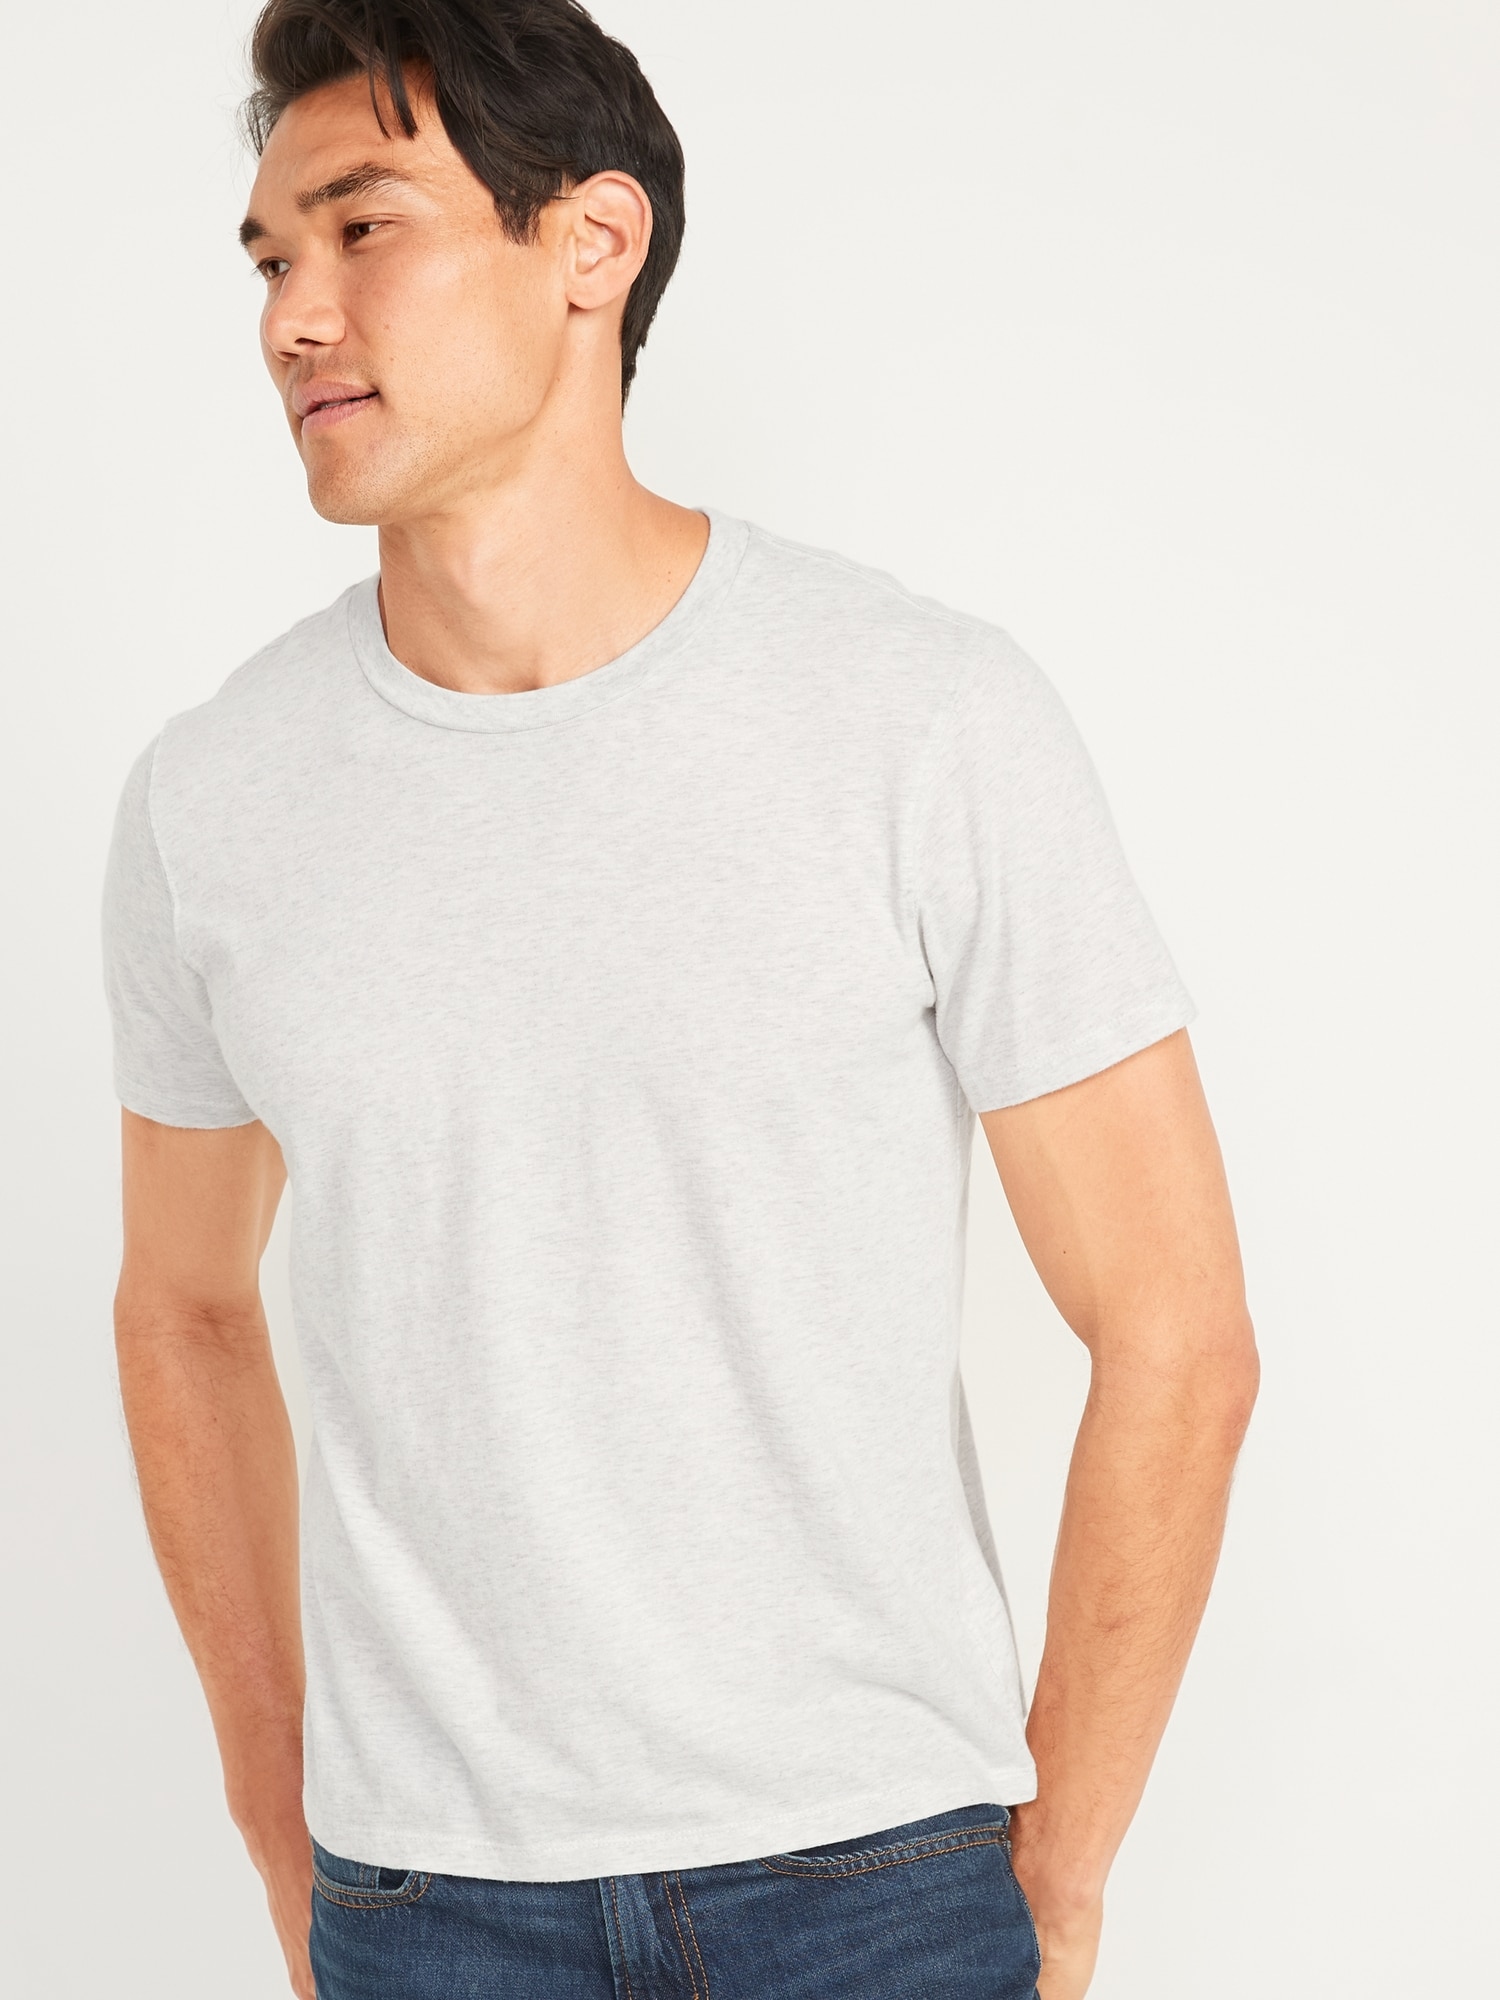 Old Navy Men's Soft-Washed Solid T-Shirt 5-Pack - - Tall Size XXXL